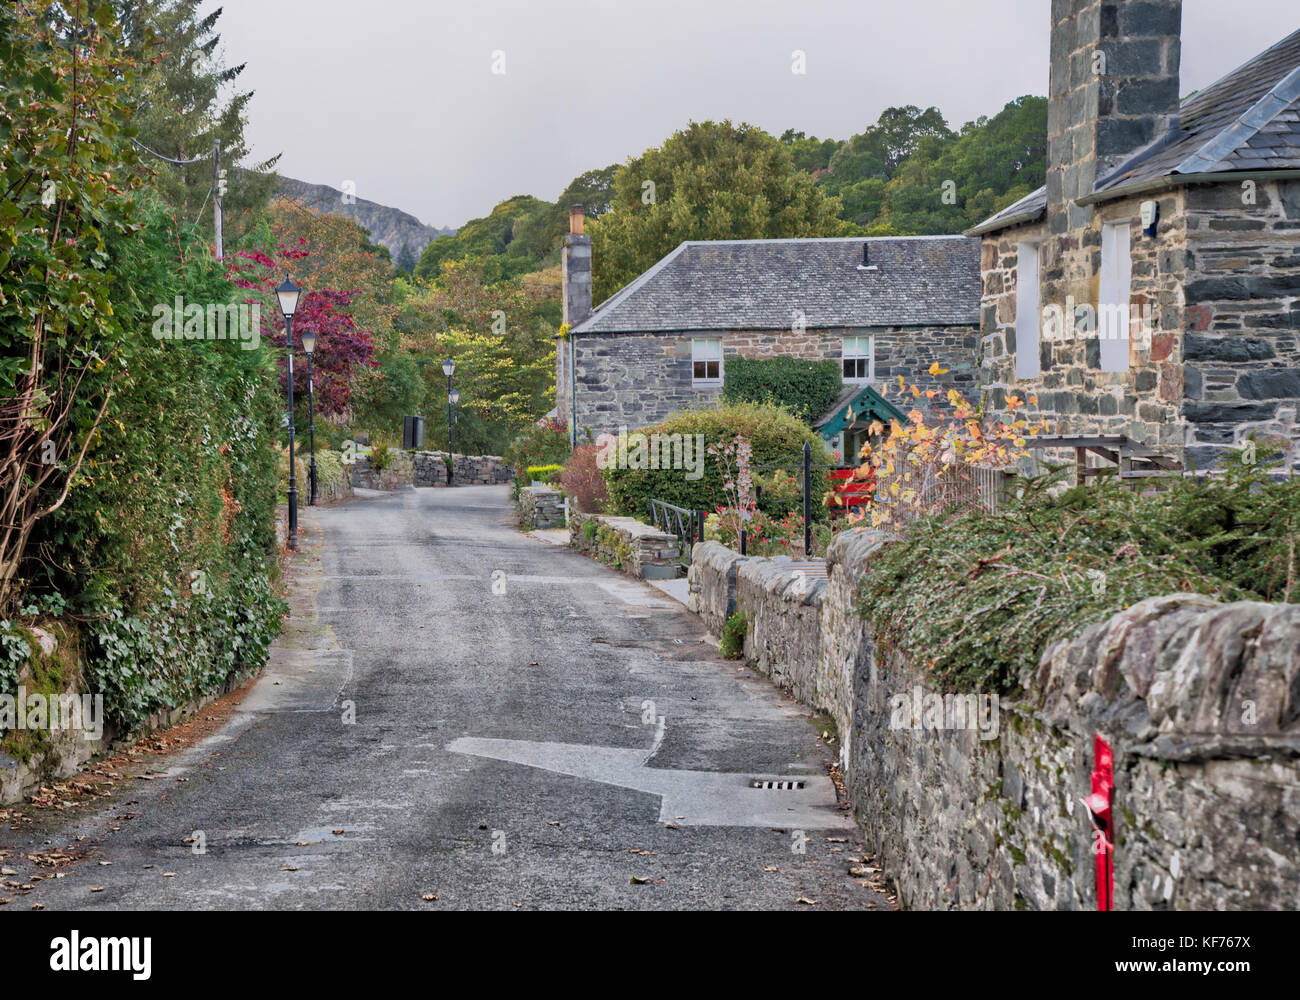 A small Scottish Village street in Pitlochry near Perth in Scotland at the start of autumn. This is the street that lies below the famous Pitlochry Fe Stock Photo